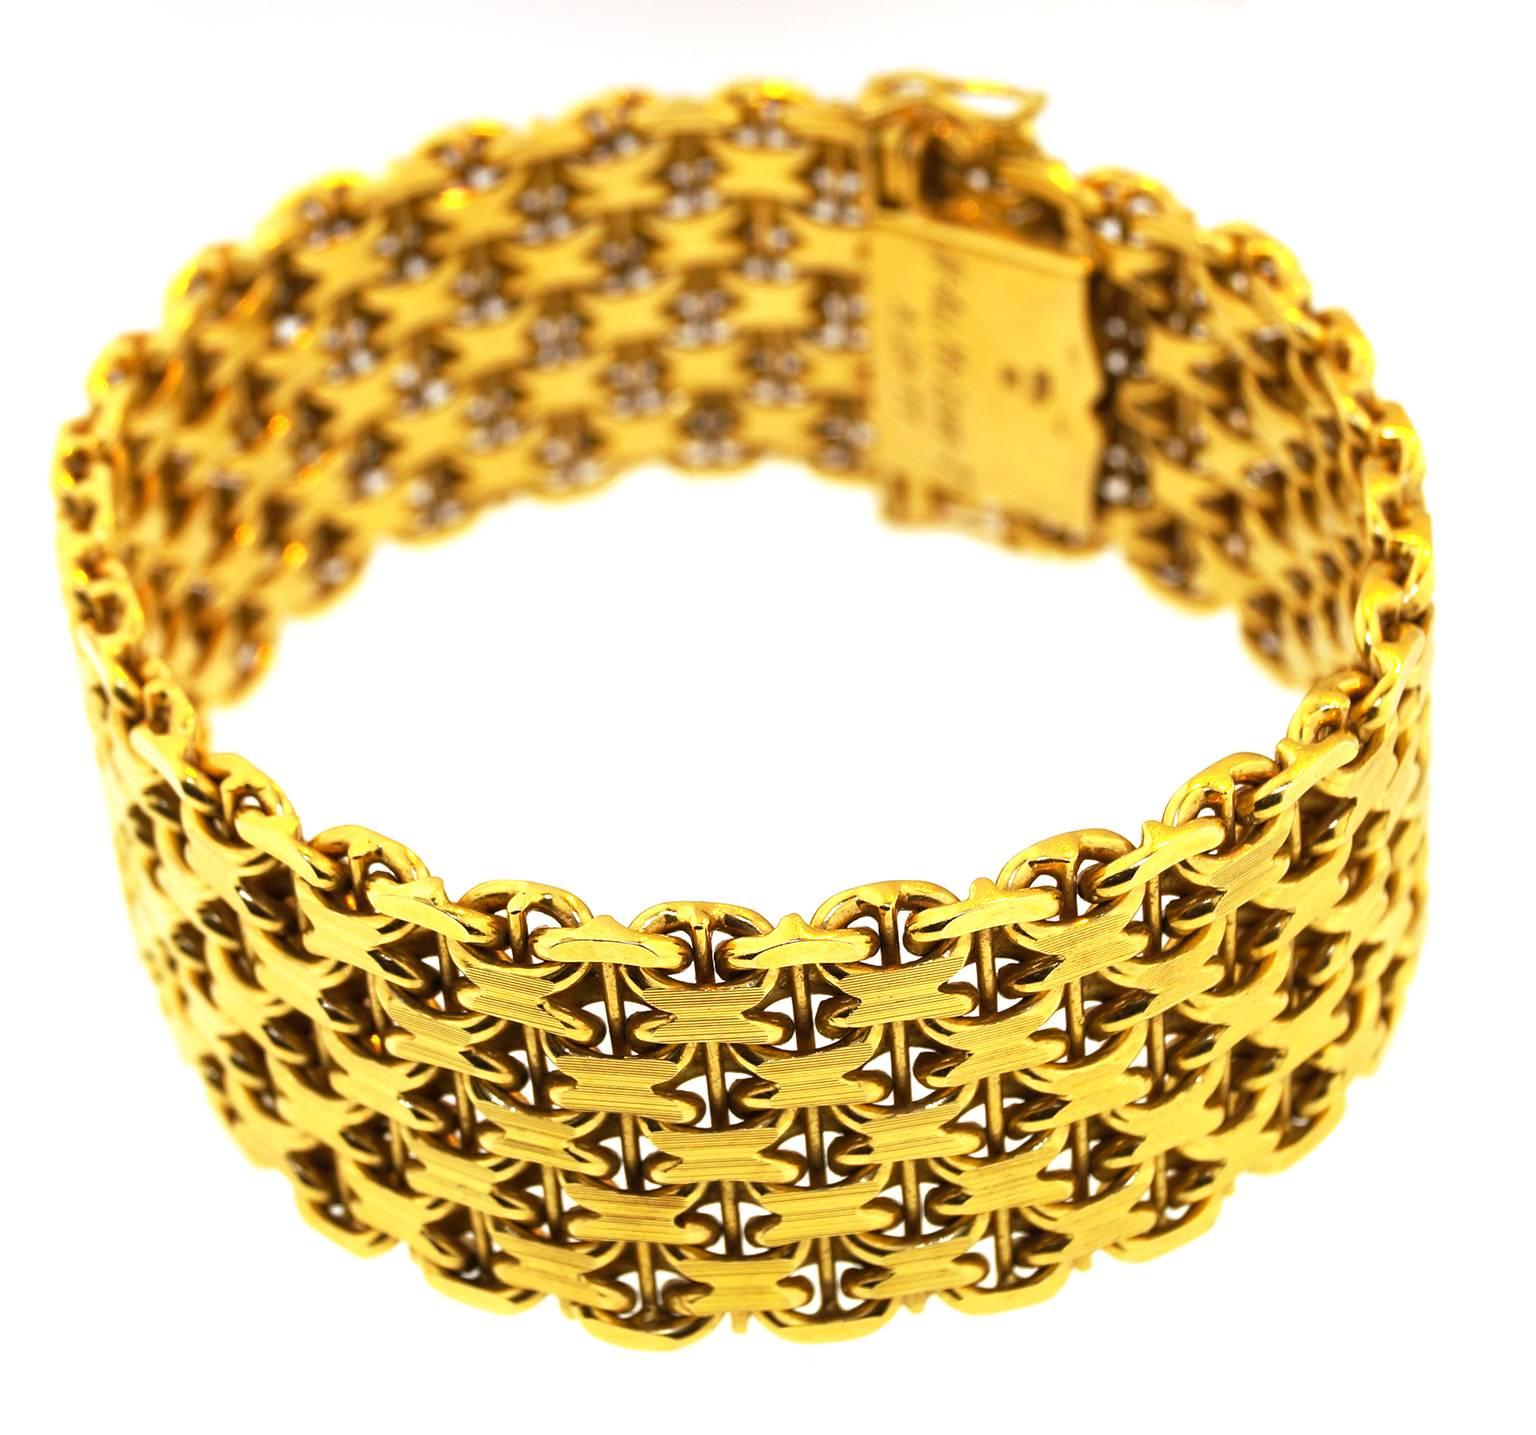 The legendary Swiss Gubelin is known for the trend-setting creation.
This beautiful cuff bracelet is made with 18k yellow gold and weights 69,83 dwt. 
This bracelet is 7.5 in long.
A beautiful wearable bracelet which could work for special event